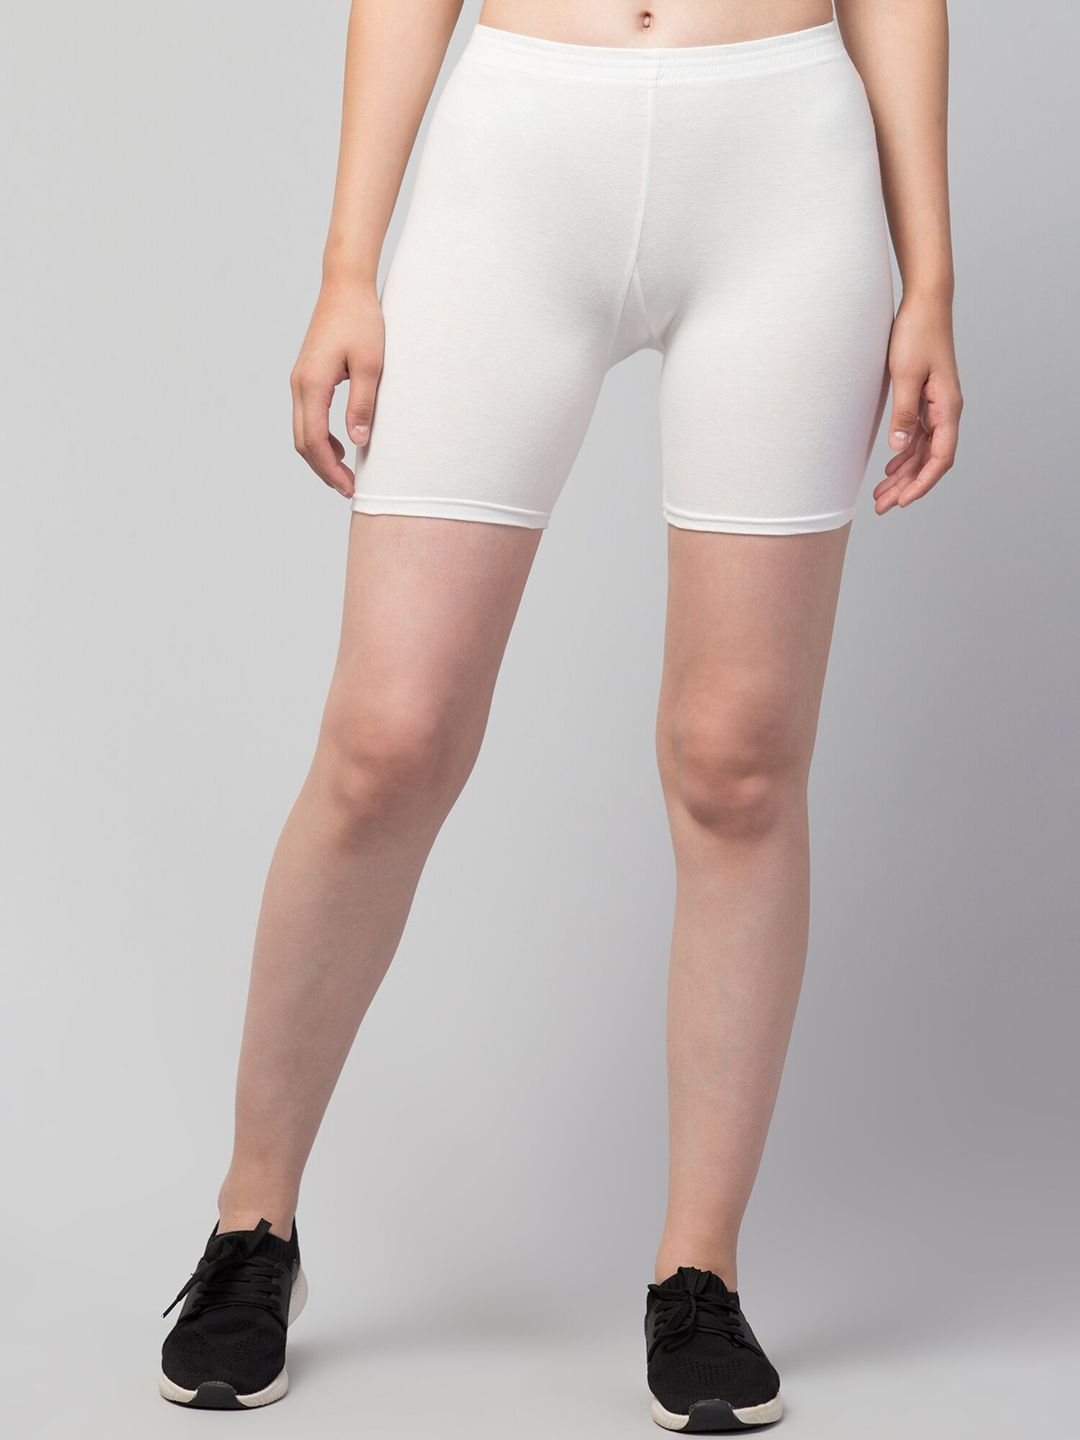 Apraa & Parma Women White Slim Fit Cotton Cycling Shorts Price in India